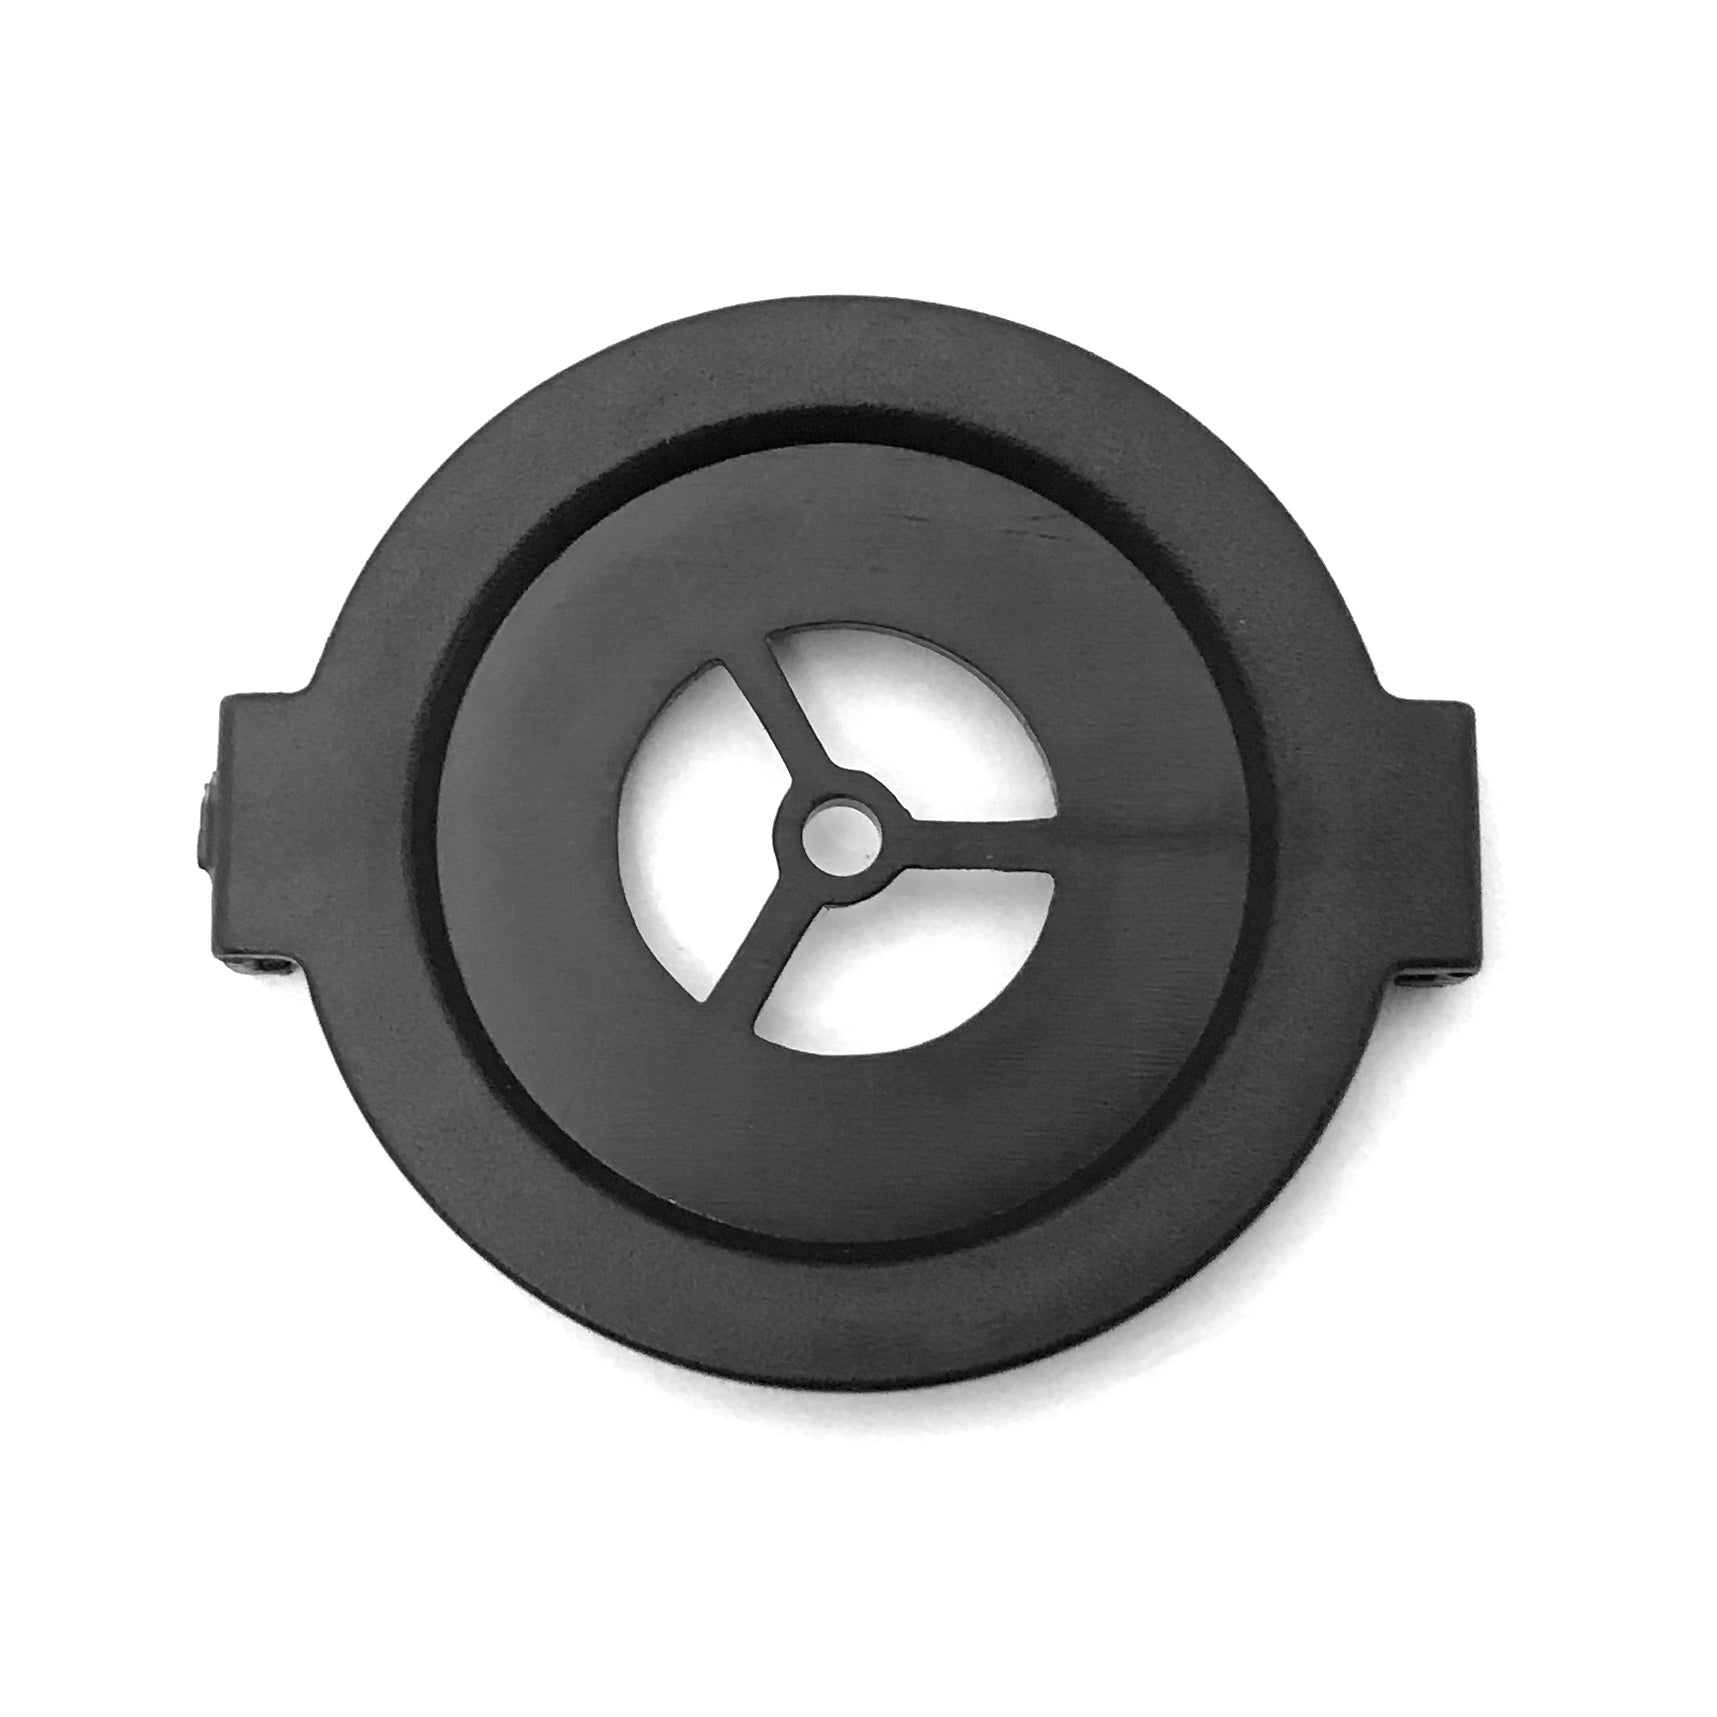 REPLACEMENT IMPELLER COVER FOR SP-93